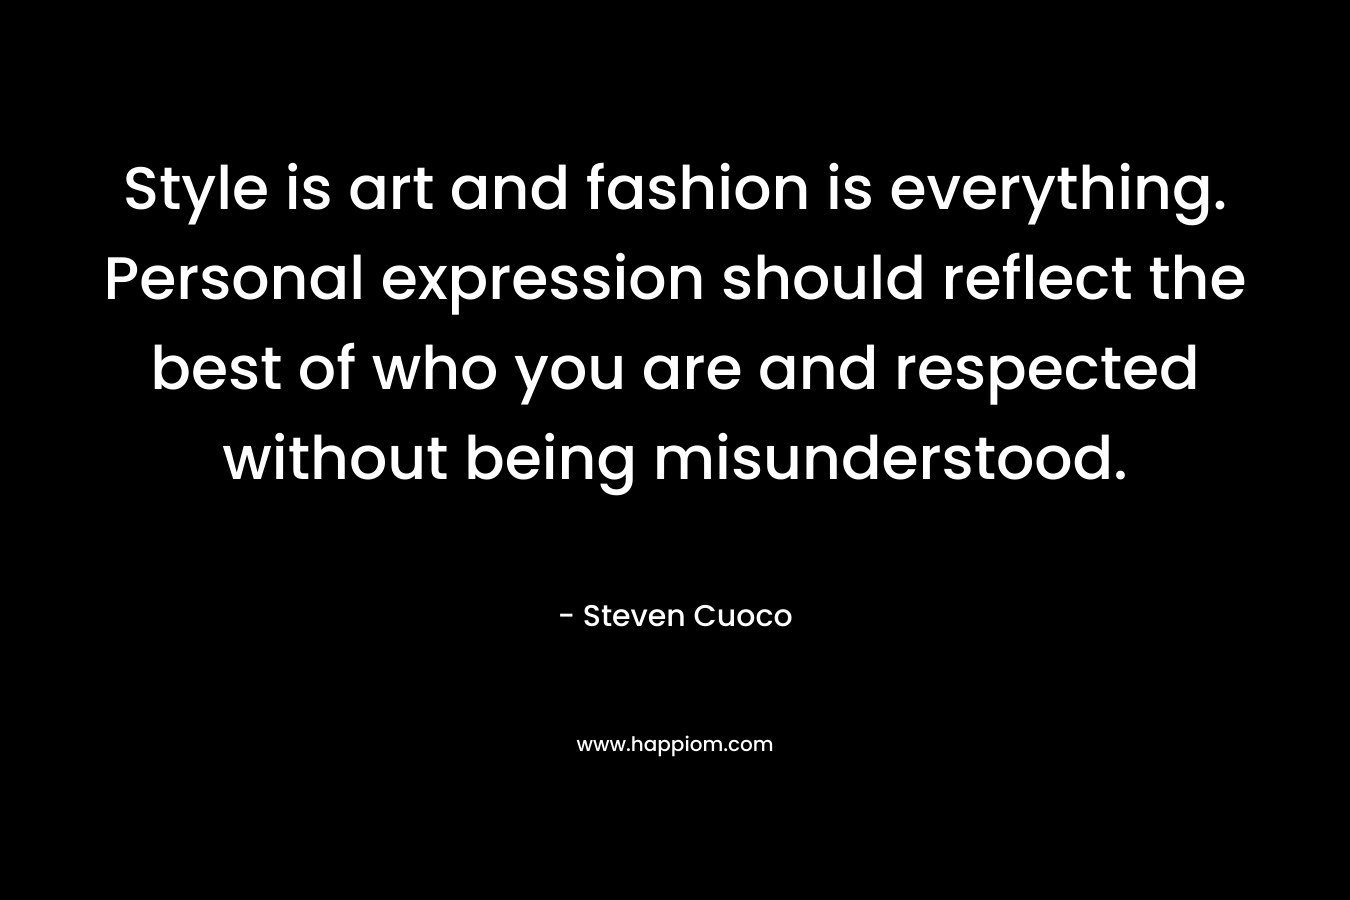 Style is art and fashion is everything. Personal expression should reflect the best of who you are and respected without being misunderstood. – Steven Cuoco